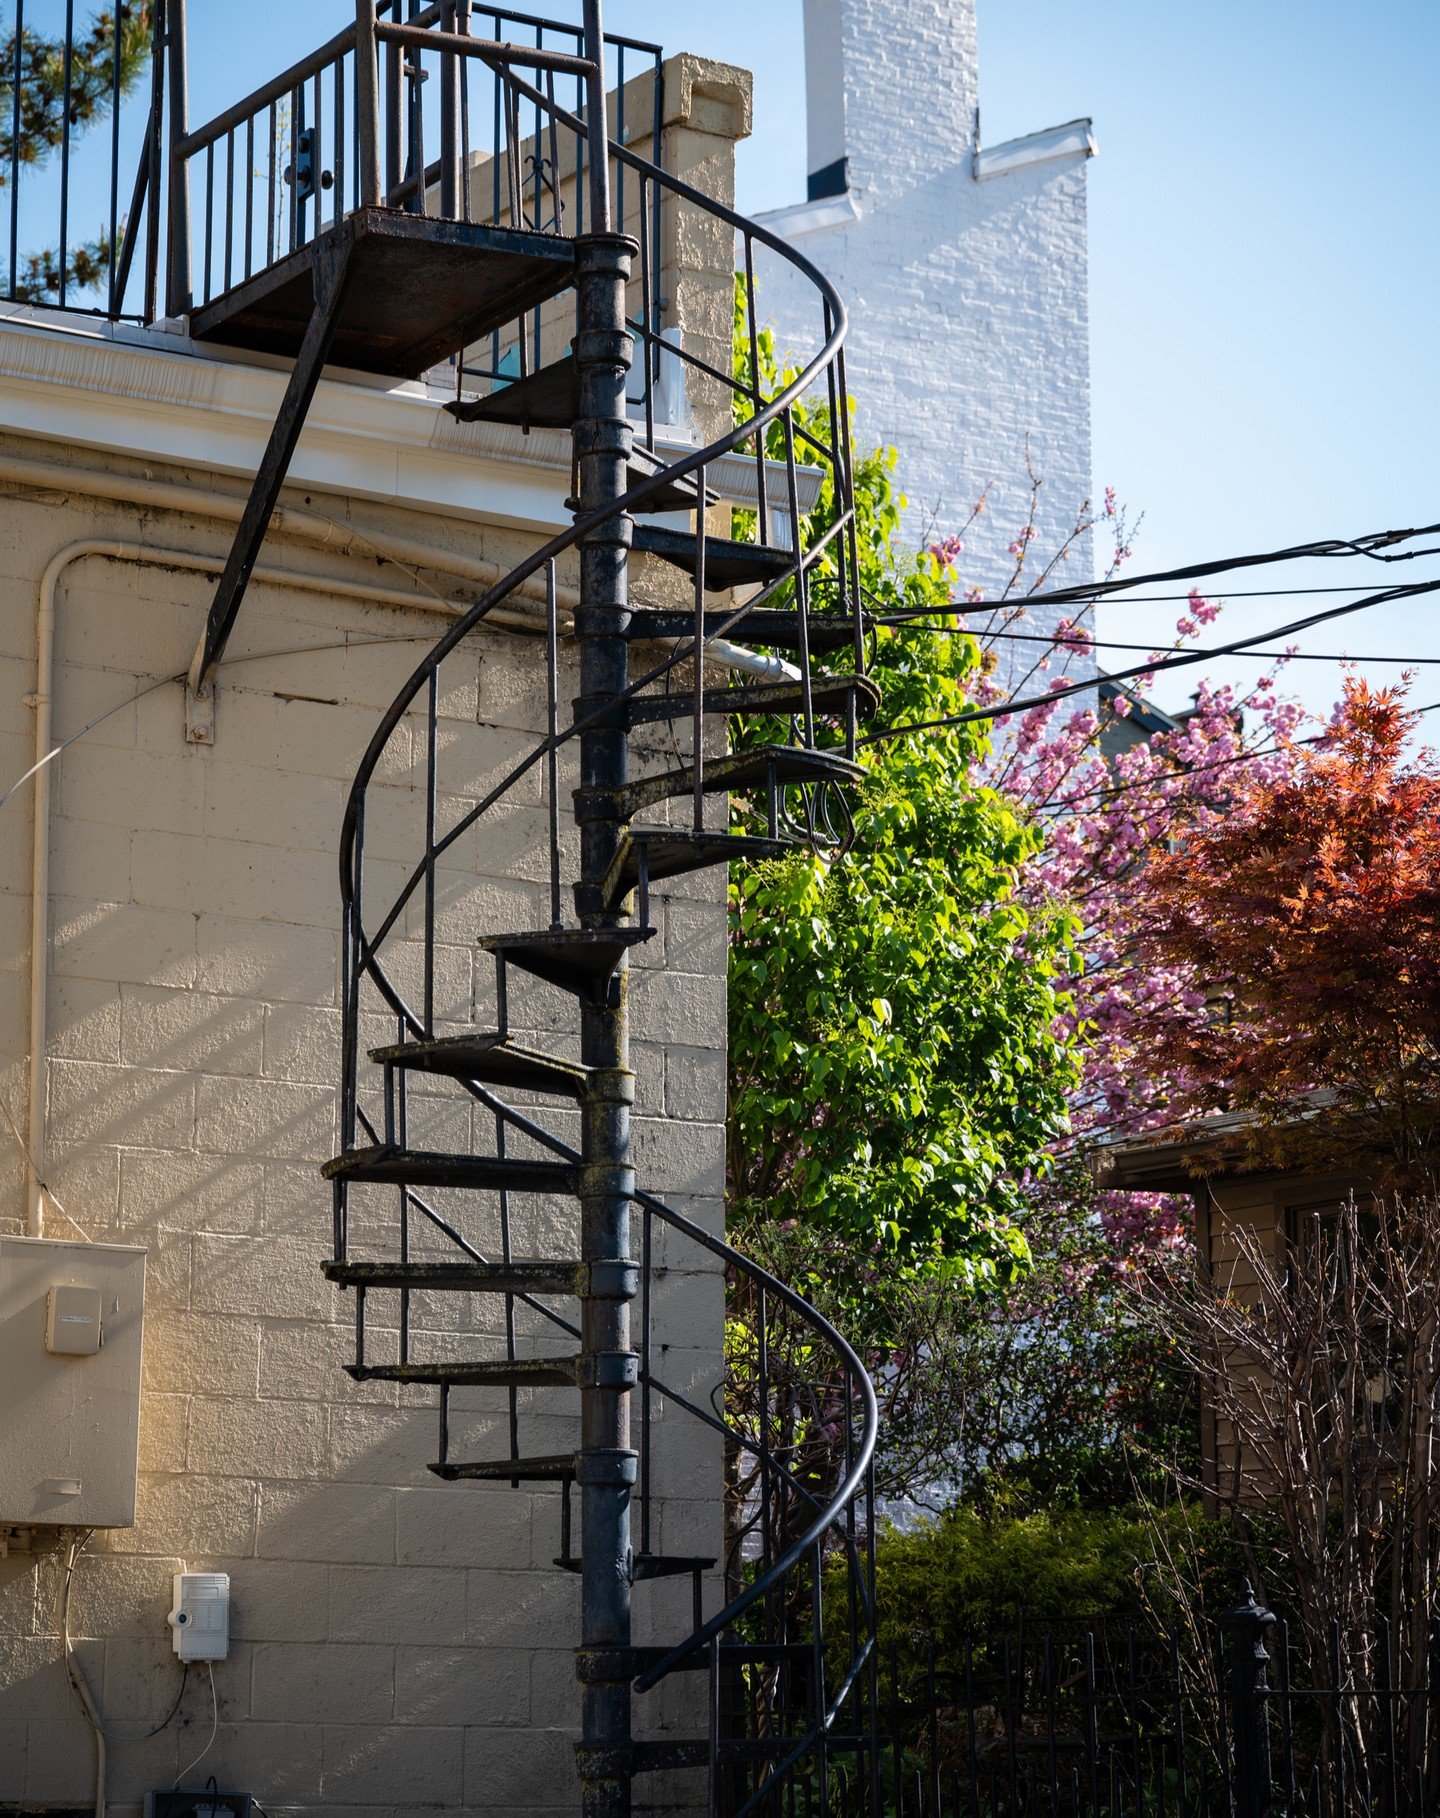 ALLEYS OF MADISON: This spiral staircase leads to a luxurious poolside lounge... in my imagination, anyway. Probably a plain ol' roof up there, but what a cool way to get there! #freewheelstudios #alleysofmadison #madisonindiana